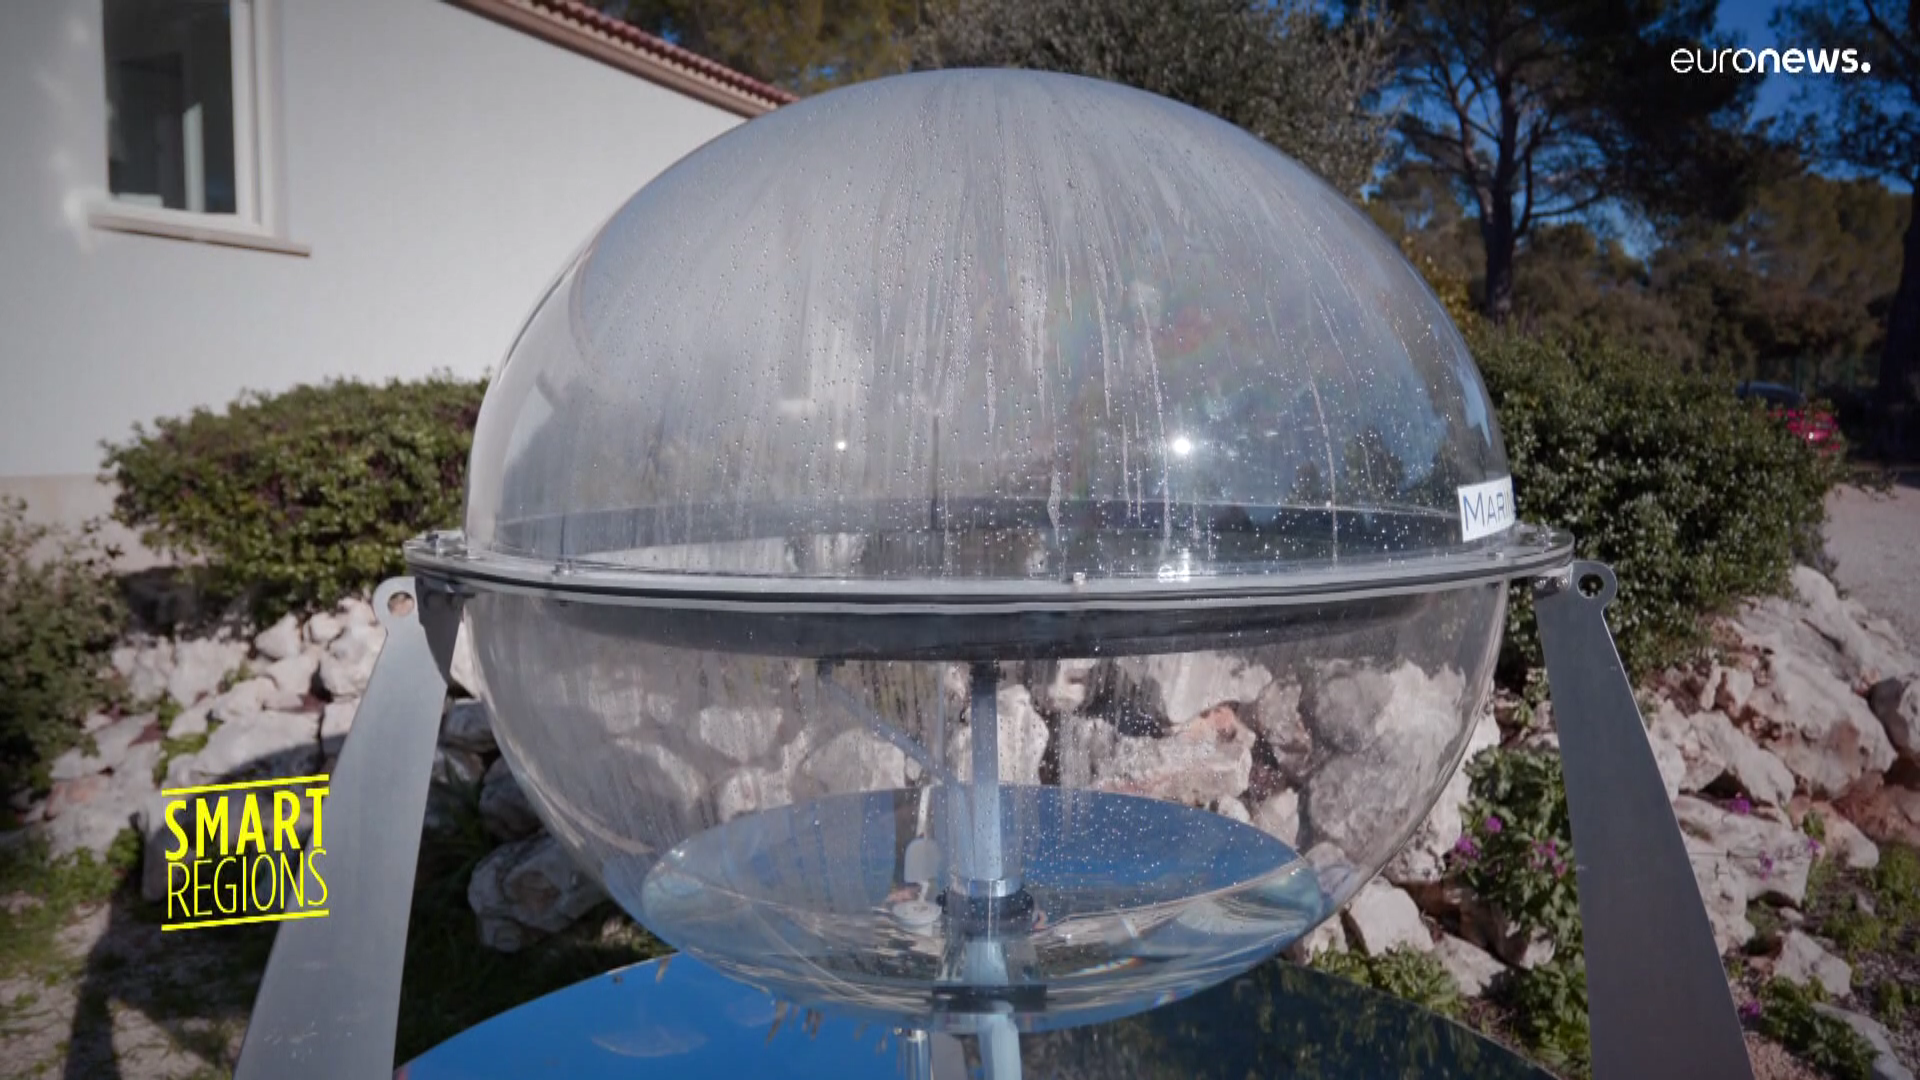 Smart Regions: The HELIO project is using the power of the sun for clean and potable water